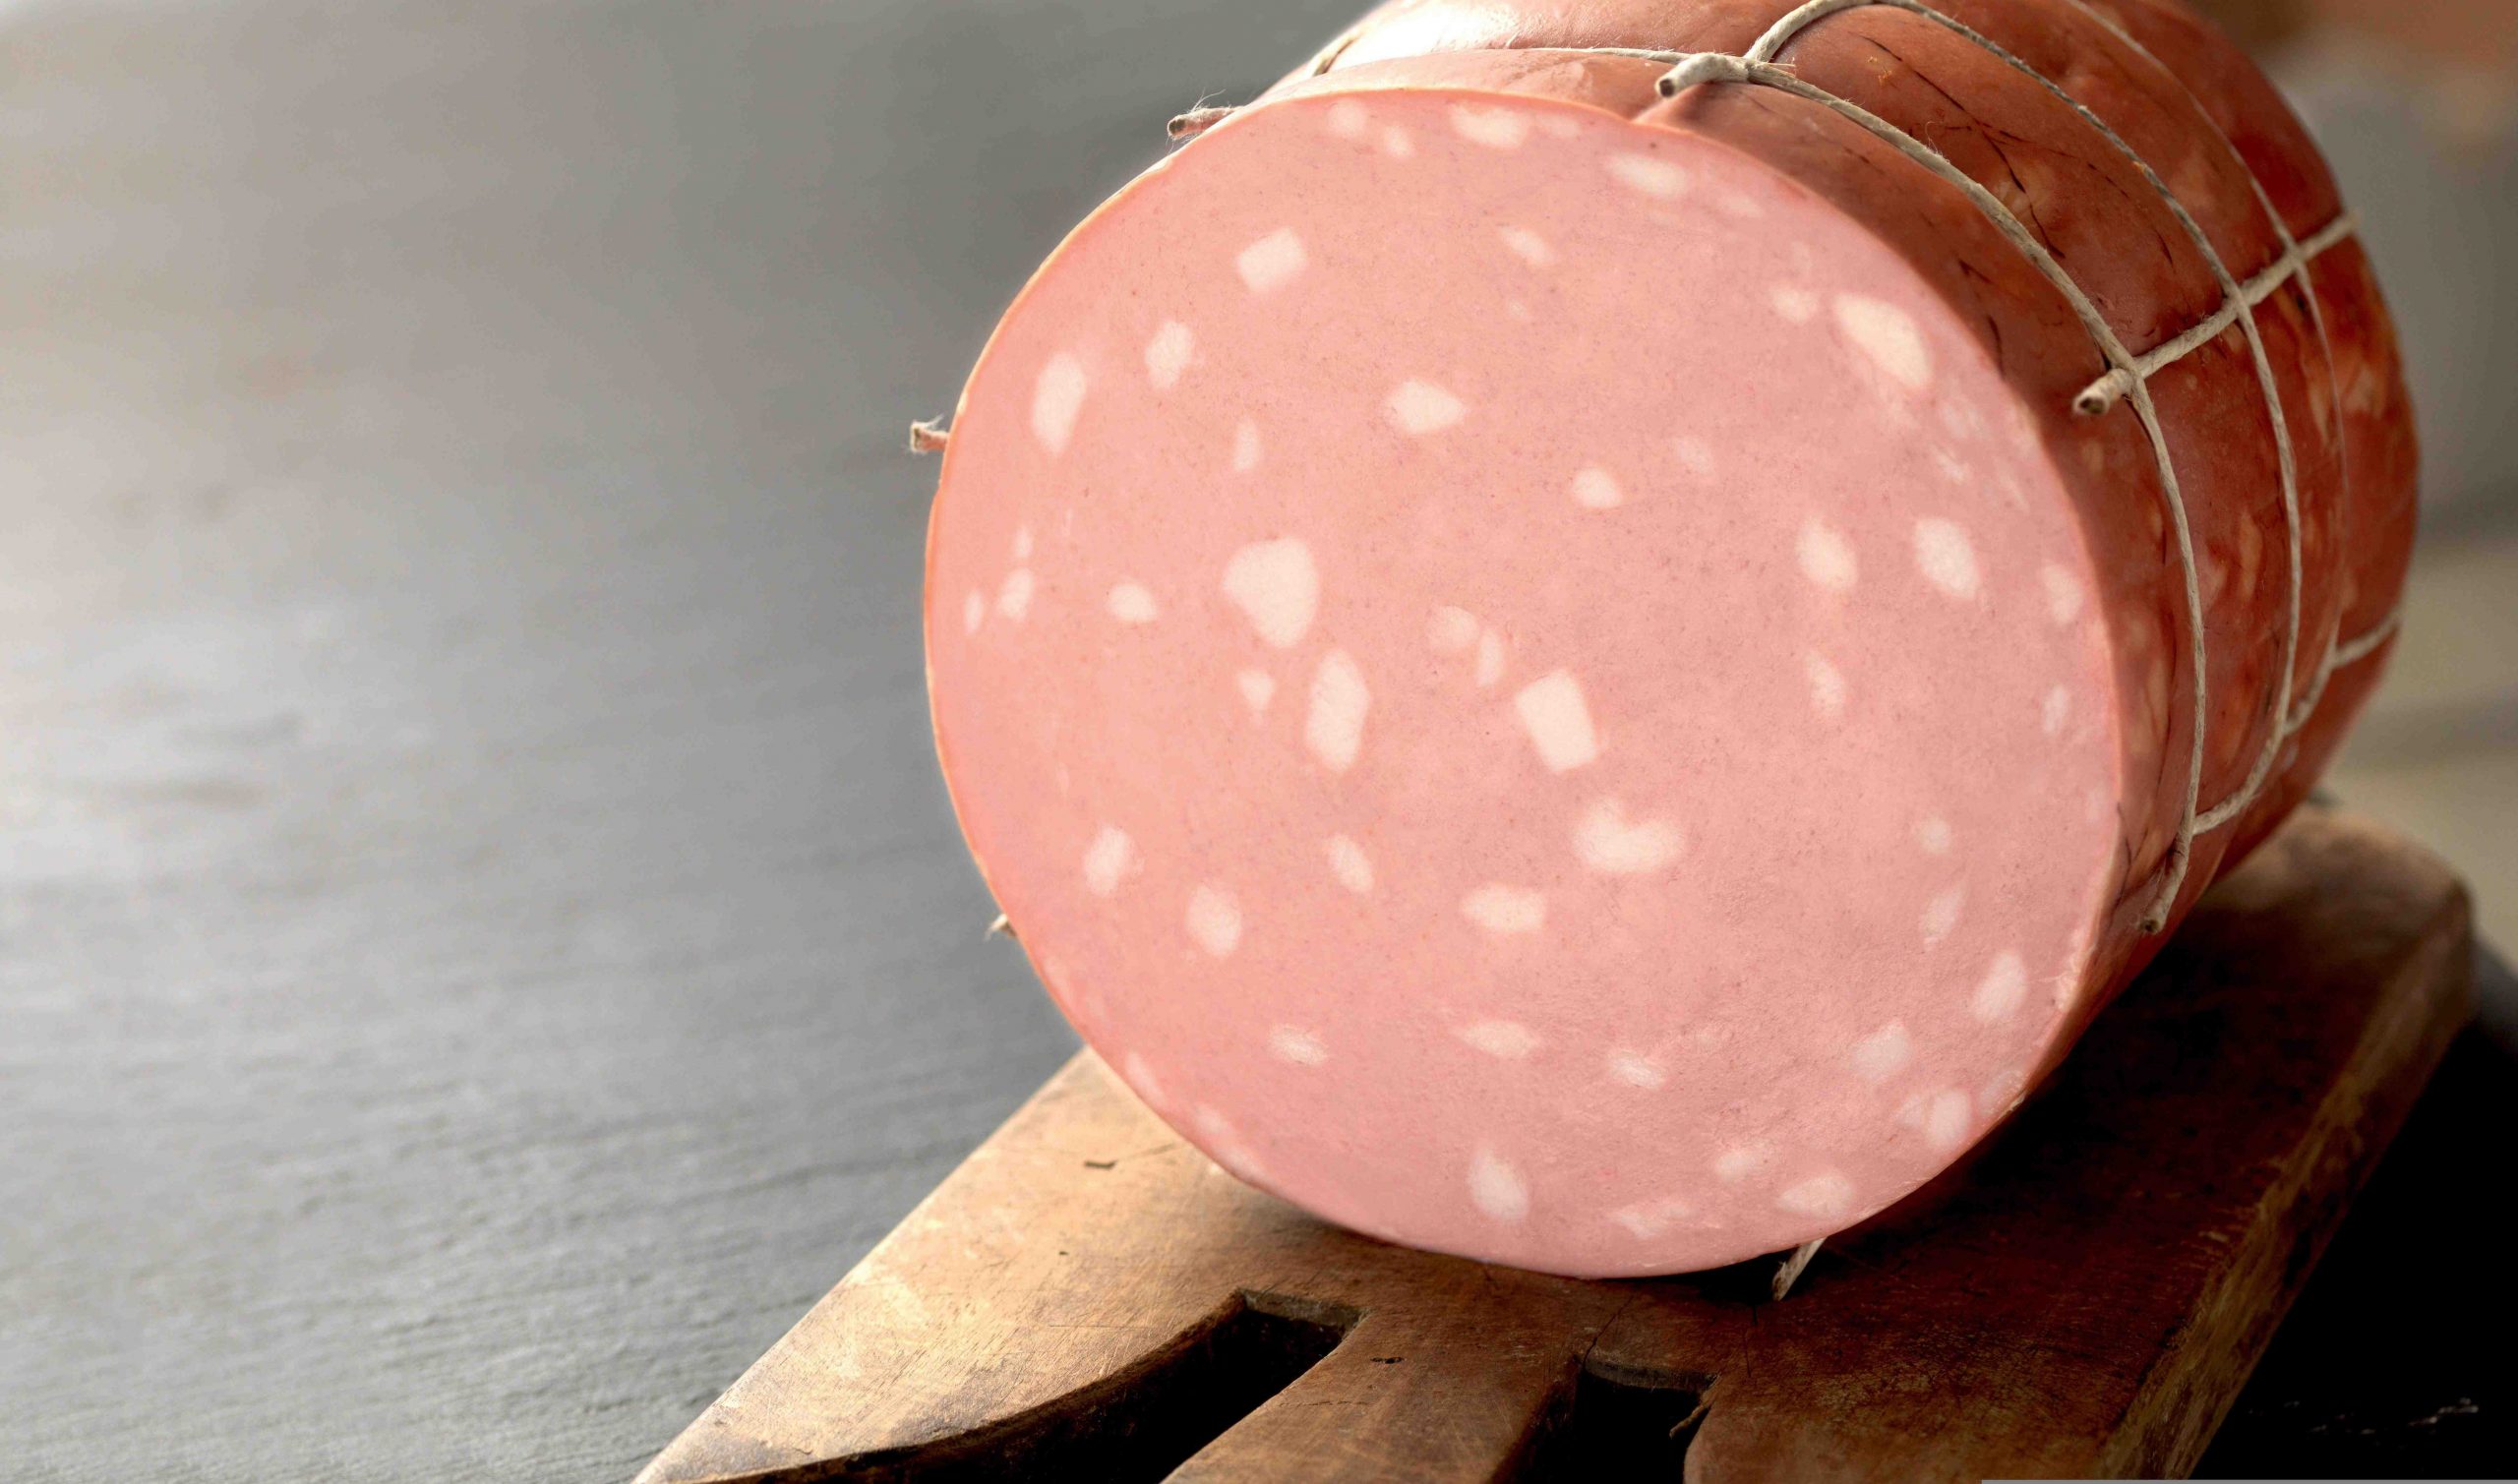 Is bologna healthy to eat?